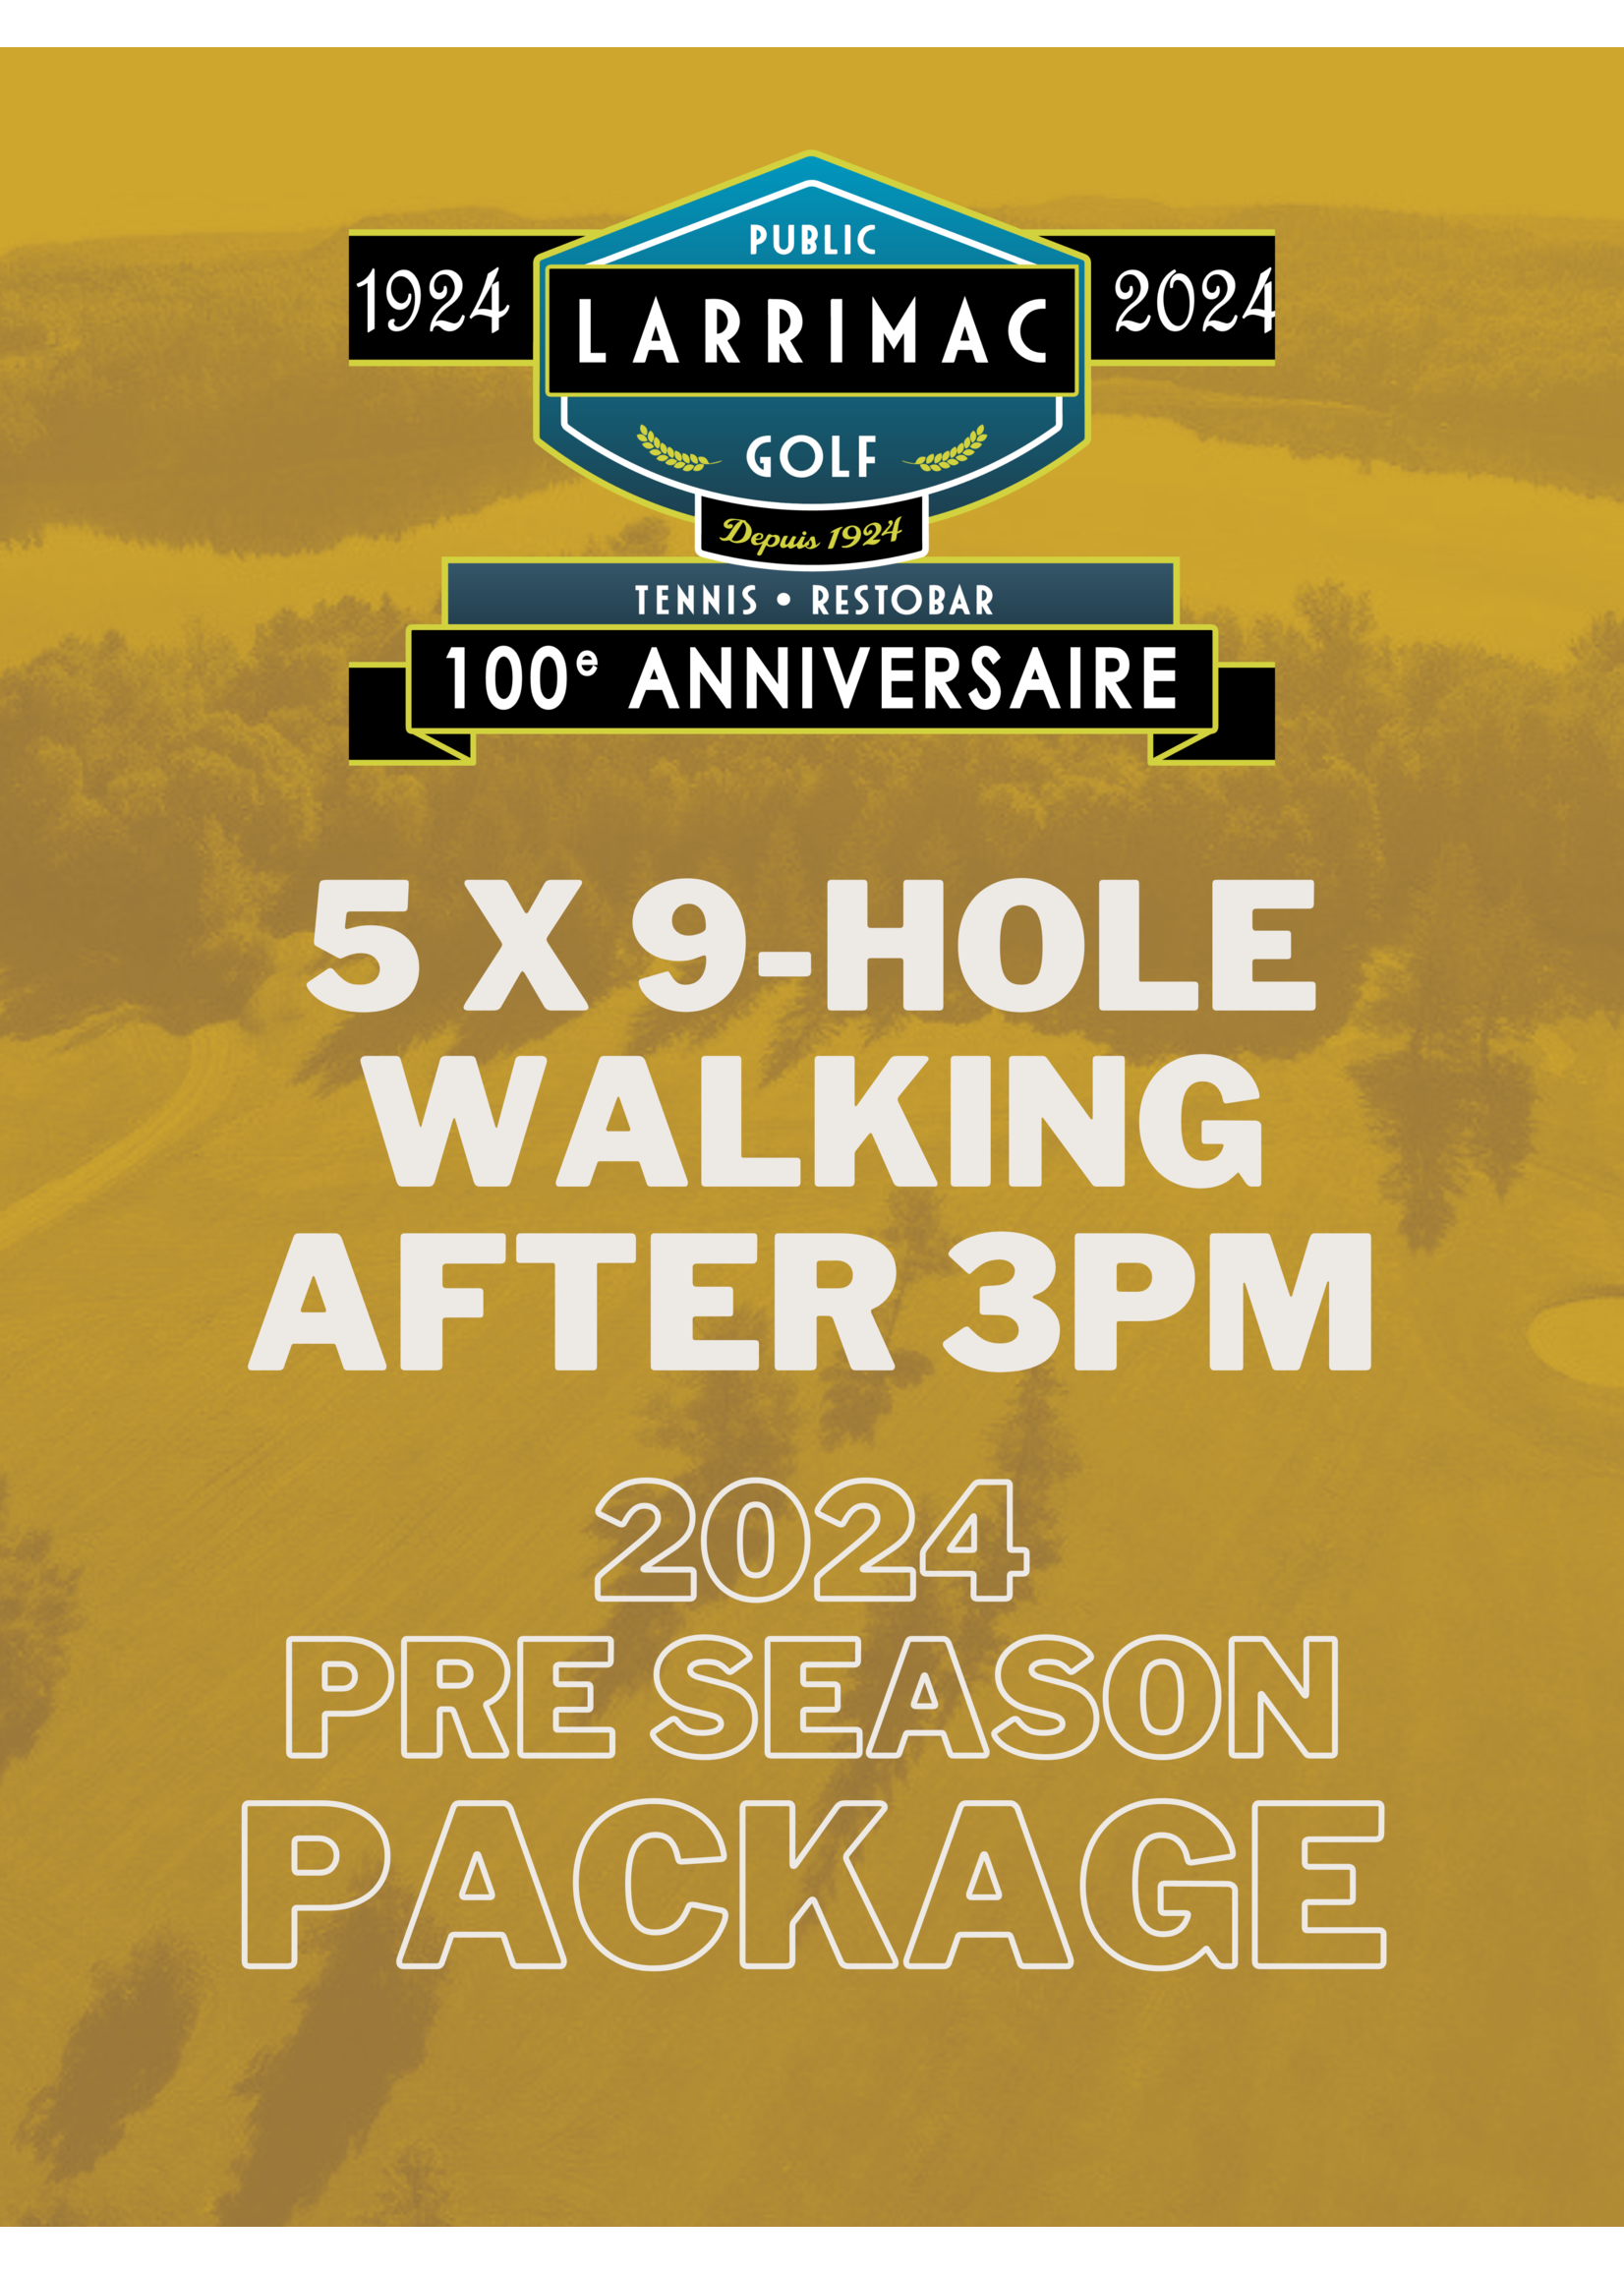 2024 packages 5 x 9 Hole Walking Twilight After 3pm Package (2024 Pre-Season)